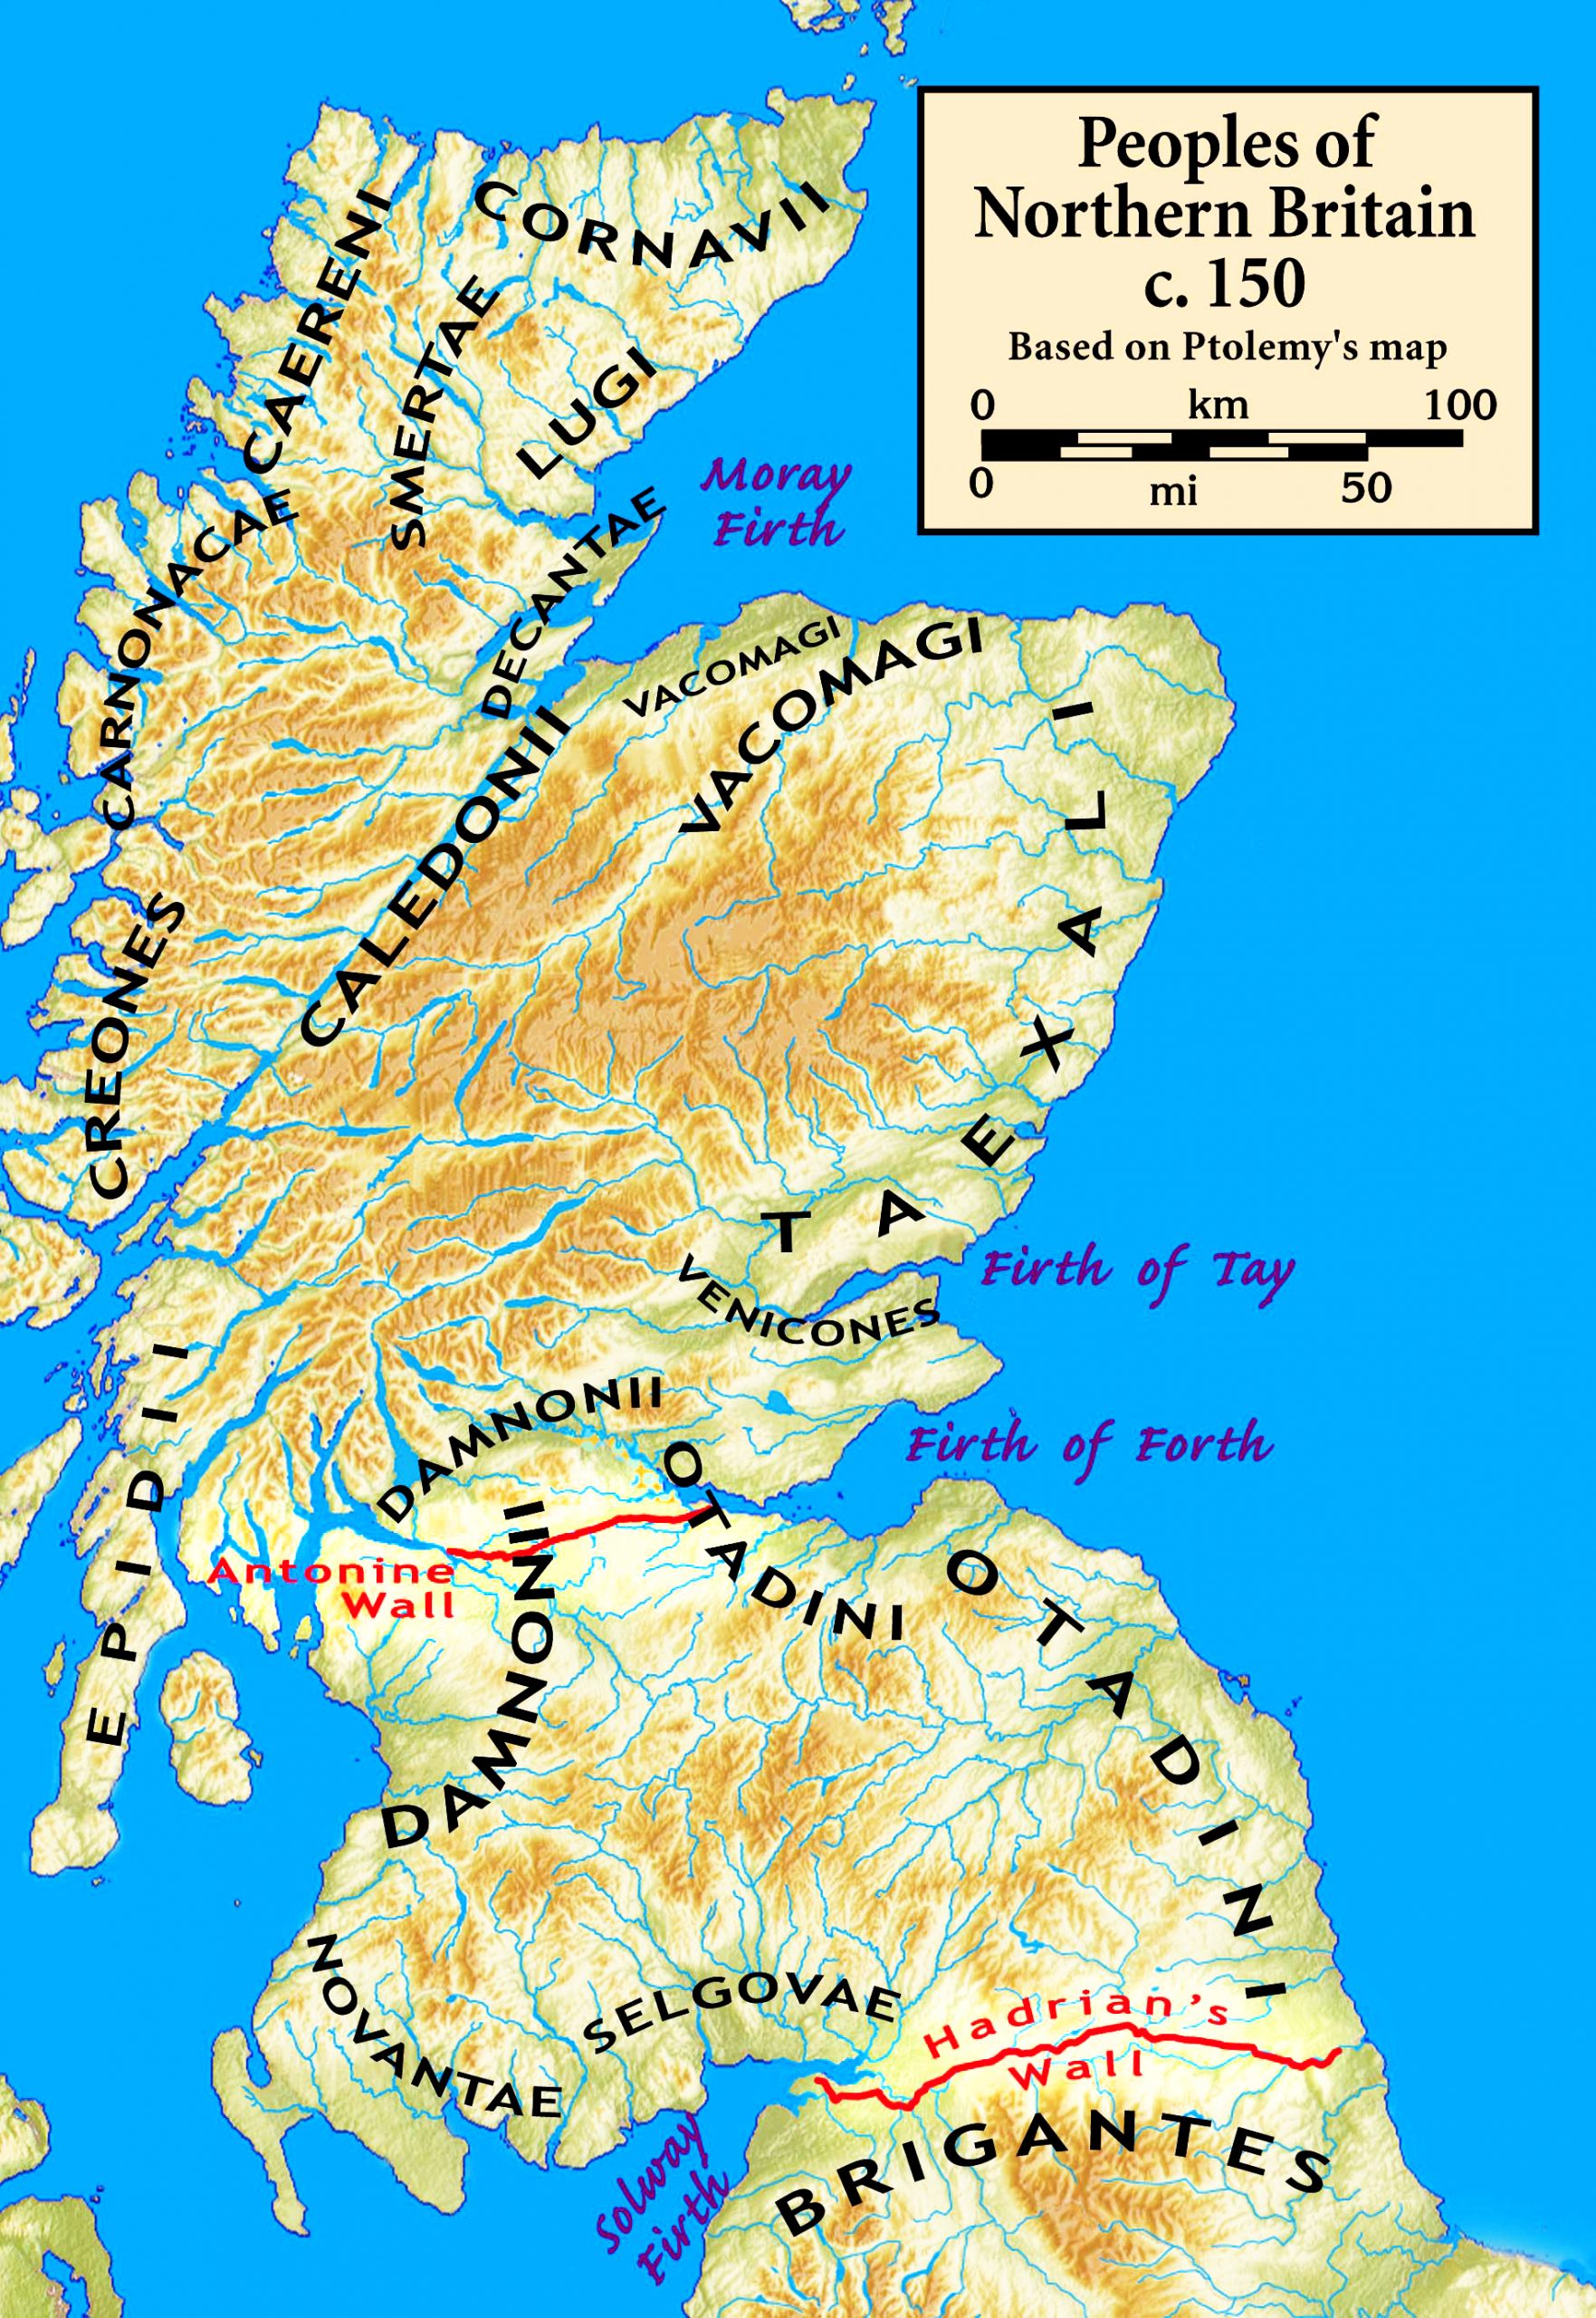 A map of Northern Britain based on Ptolemy’s 150 CE map, showing the locations of different peoples in a blue and yellow color scheme. The map has a scale, a legend, and labels for different regions. It is also showing the locations of Antoine and Hadrian’s walls in red.